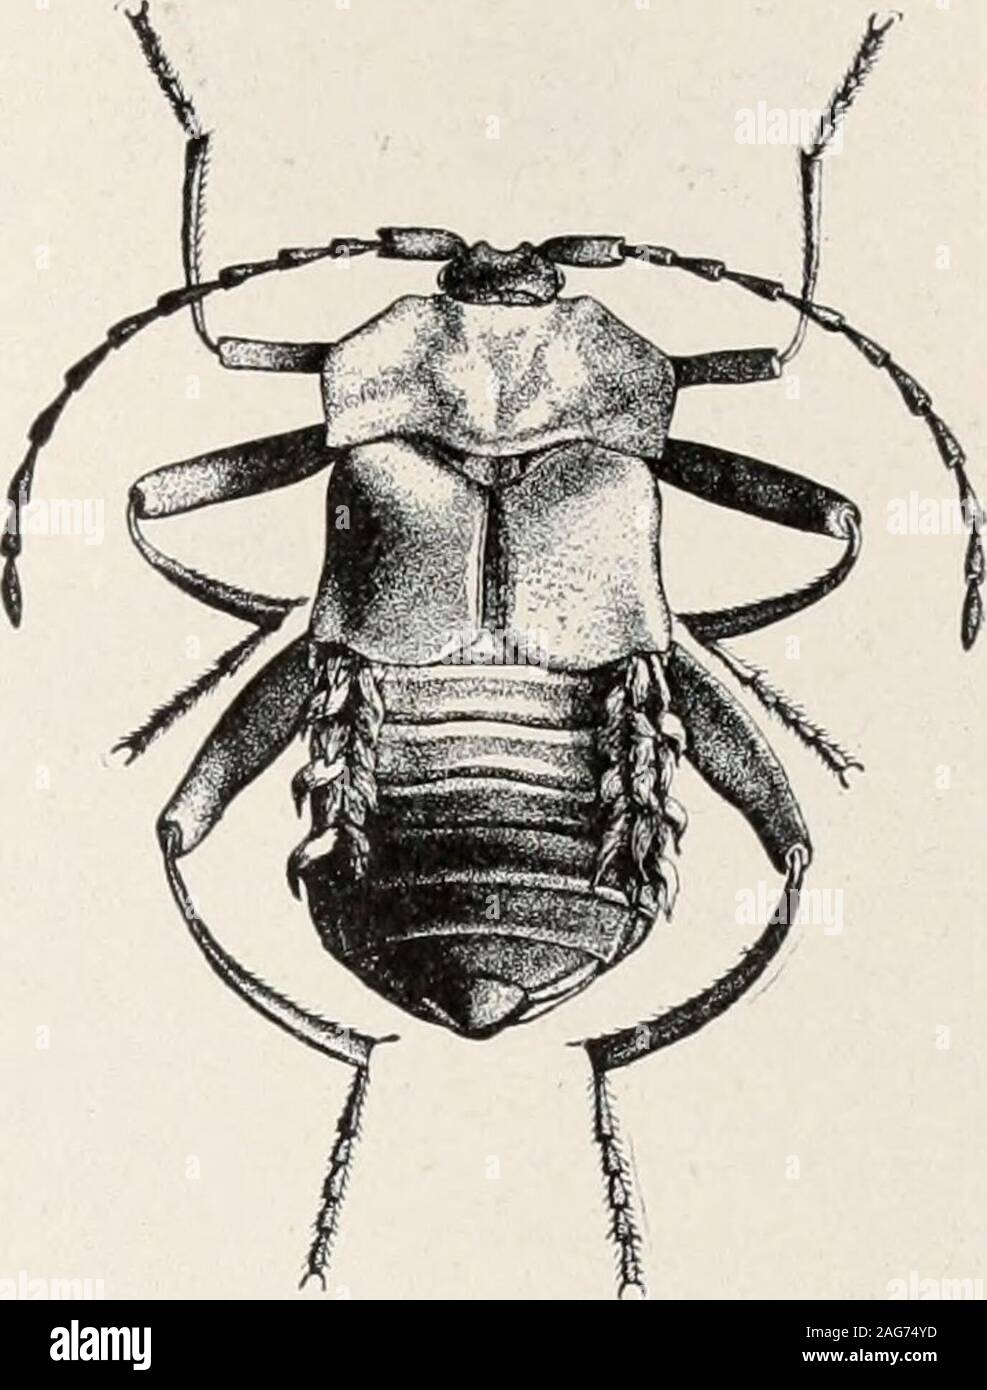 . Ants; their structure, development and behavior. vations inmore than thirty special papers (seeliterature in Appendix E) and never tires of referring to these insectsin his more general works. The following paragraphs, taken fromone of his papers (1897^0, give a summary of the life-history ofthese beetles: The Lomechusa group, embracing the palearctic genera Loinc-chusa and Atemeles and the nearctic genus Xenodusa, contains, froman ethological point of view, the most interesting and at the same timethe largest of the true ant-guests (symphiles) of the north temperateregion. These Staphylinic Stock Photo